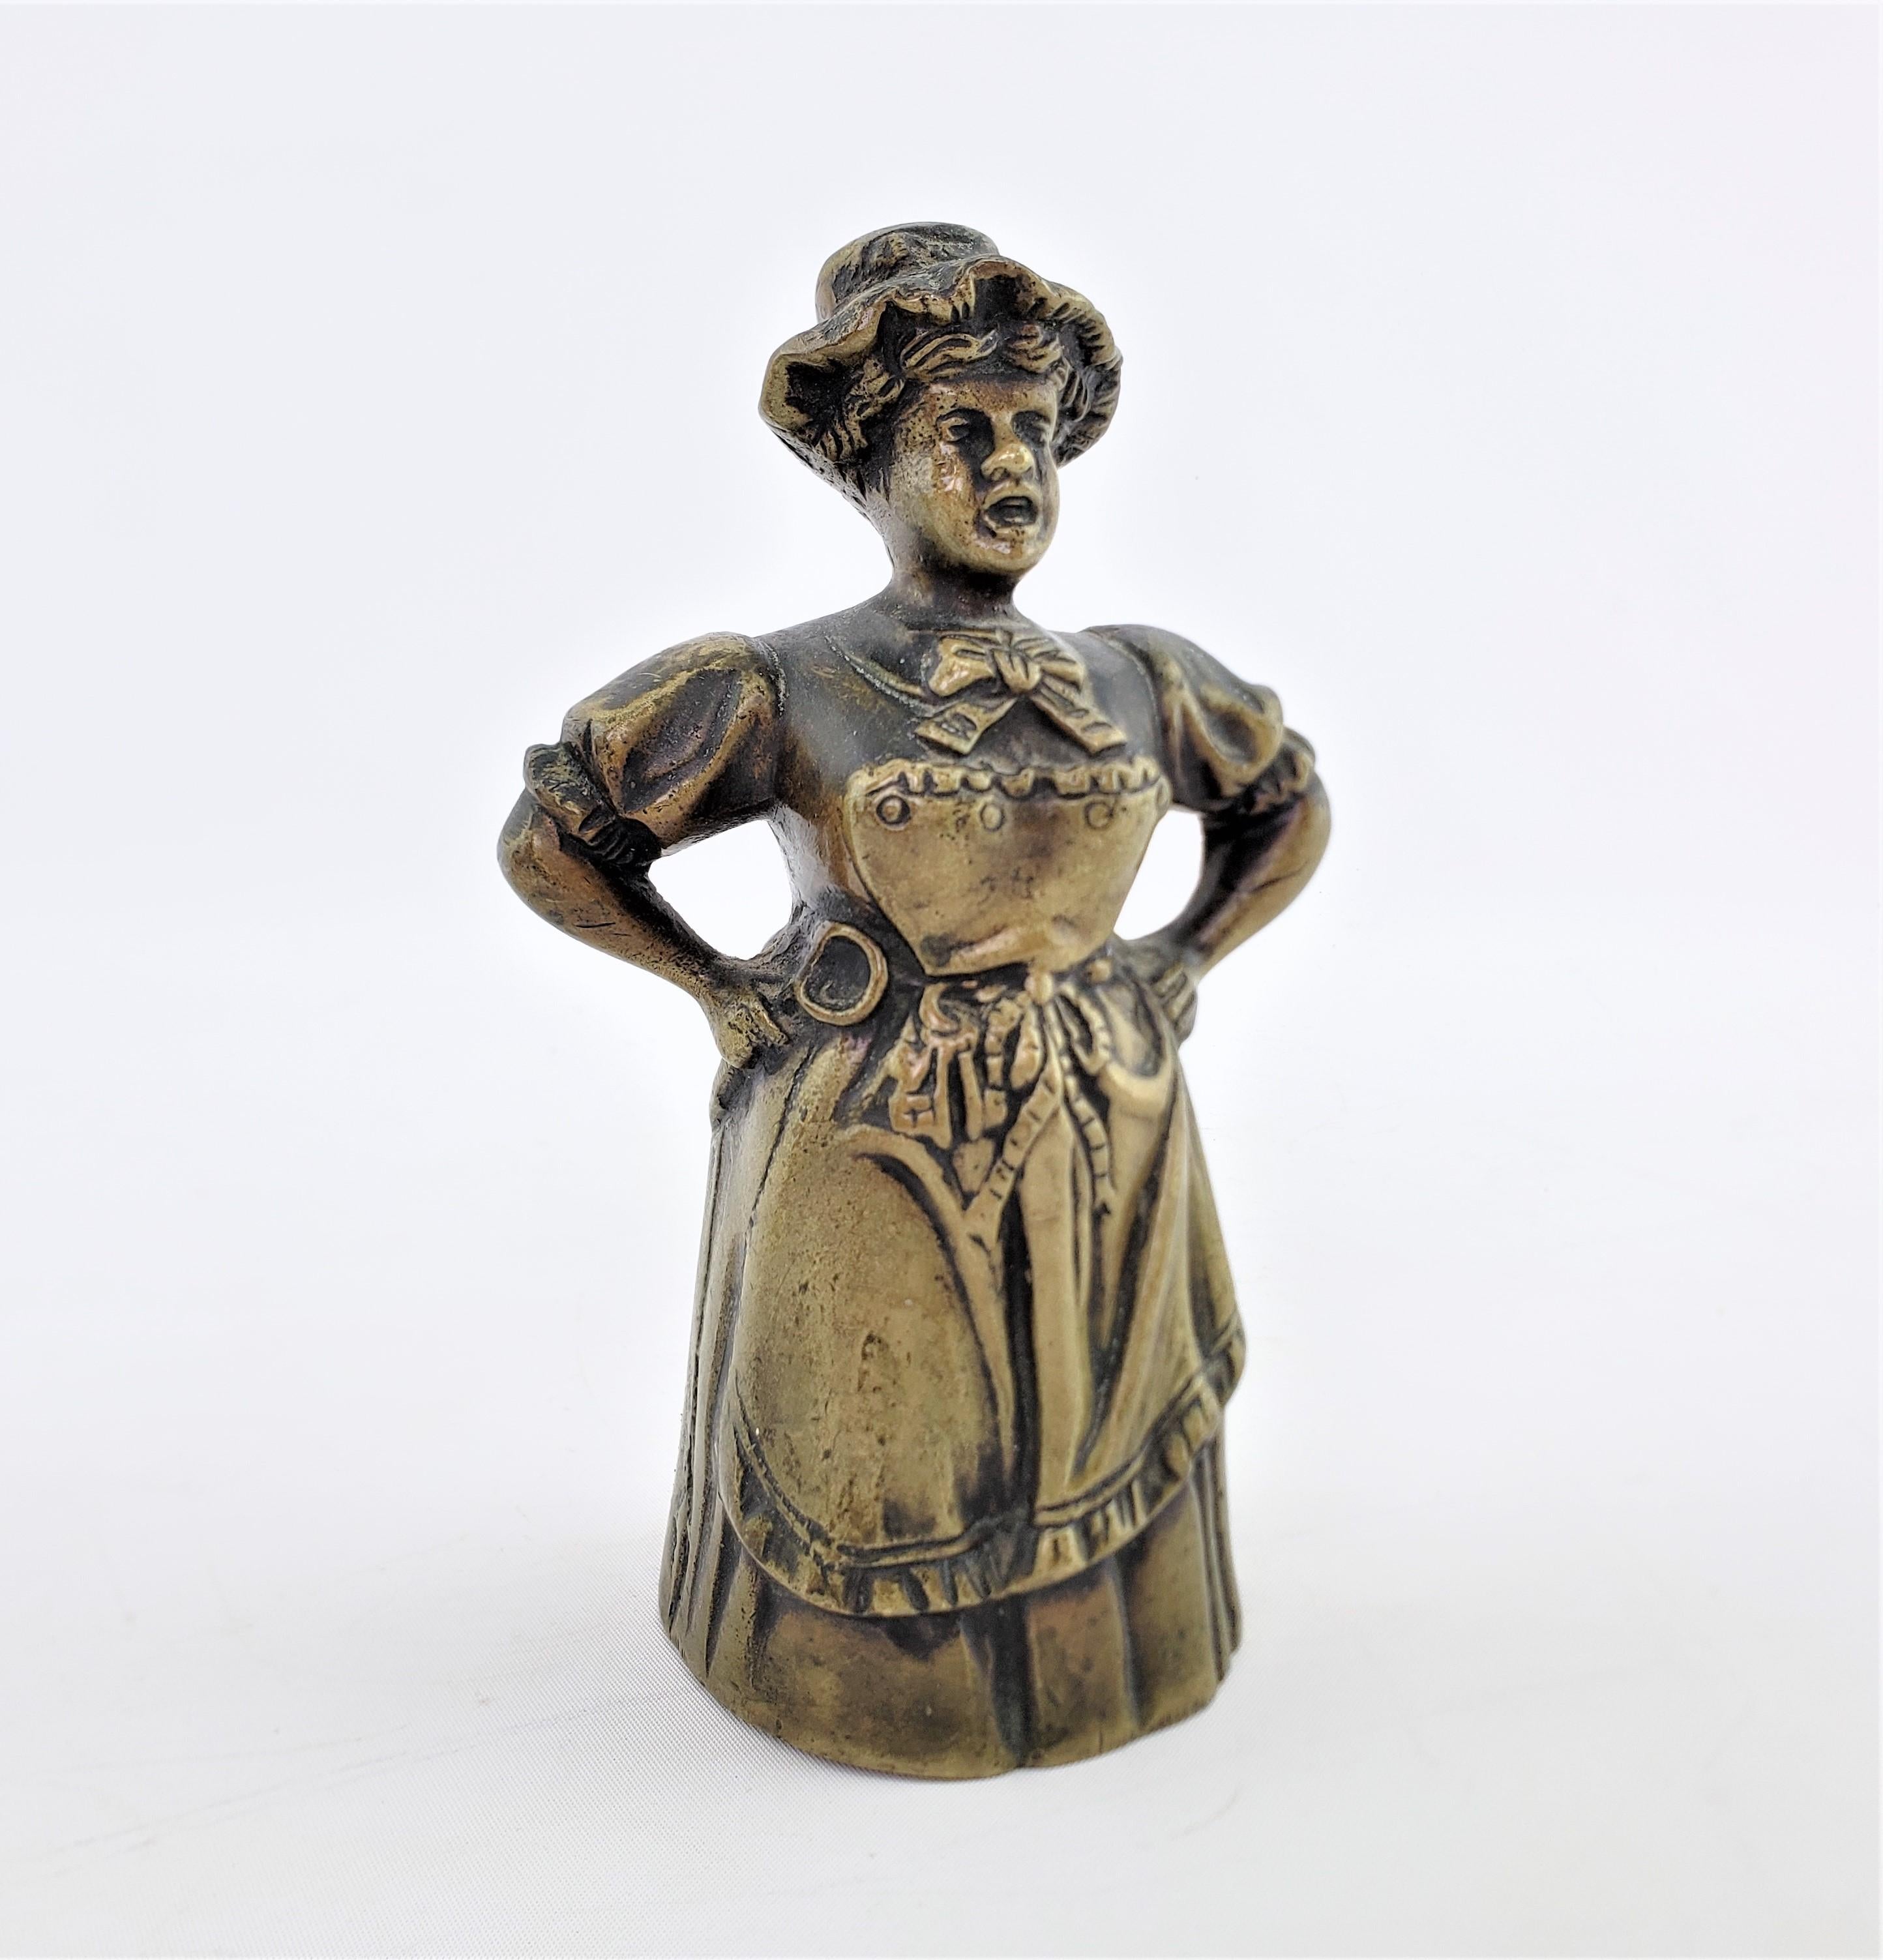 This antique whimsical cast bronze figural bell is unsigned and has no foundry mark, but is presumed to originate from the United States and date to approximately 1880 and done in the period Victorian style. This detailed cast bell depicts an upset